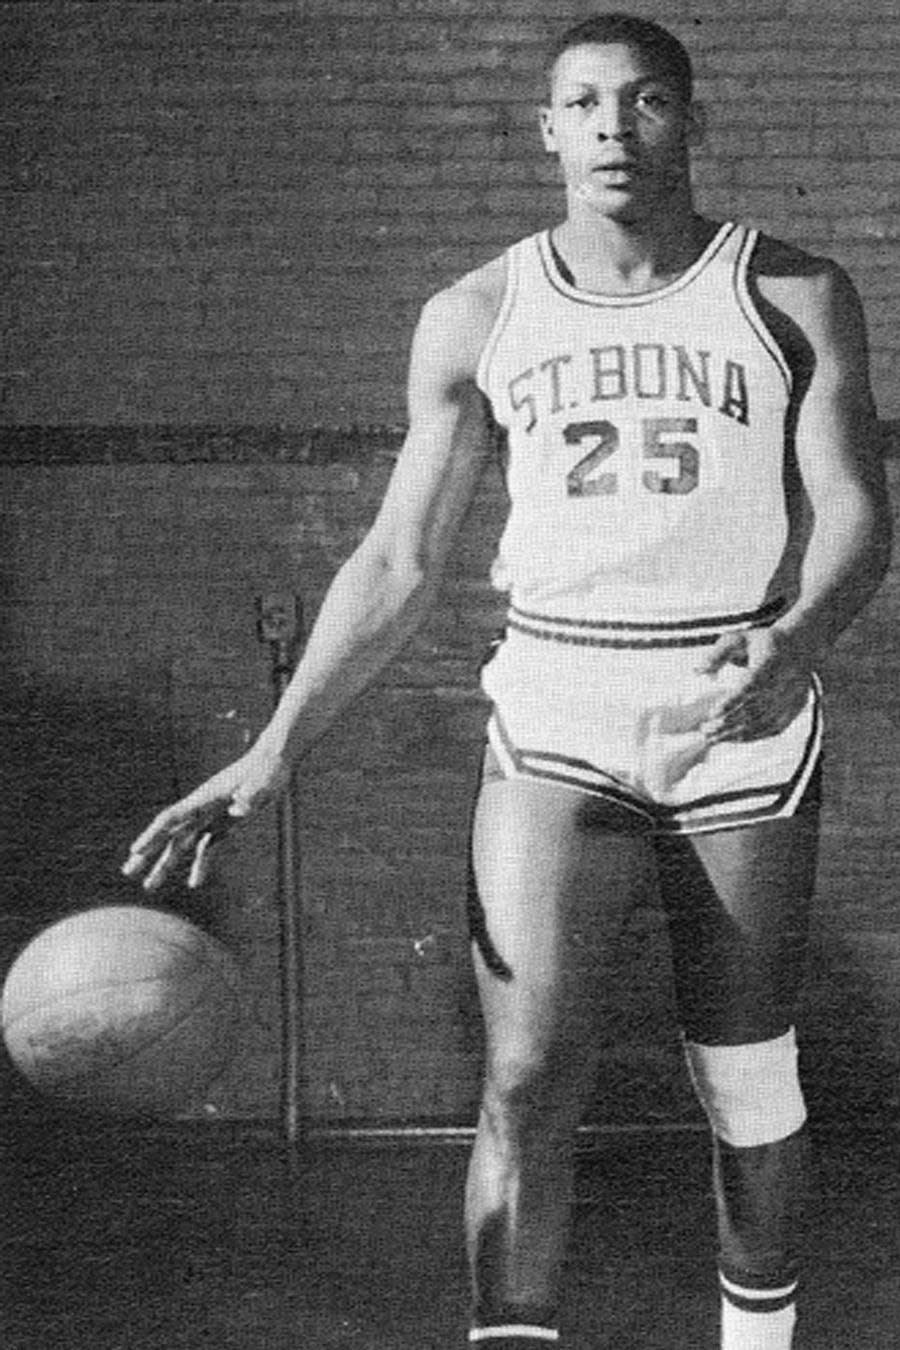 George Carter graduated from St. Bonaventure in 1967. His college basketball program called him one of the program's &quot;best-ever men's players&quot; when he died in November.